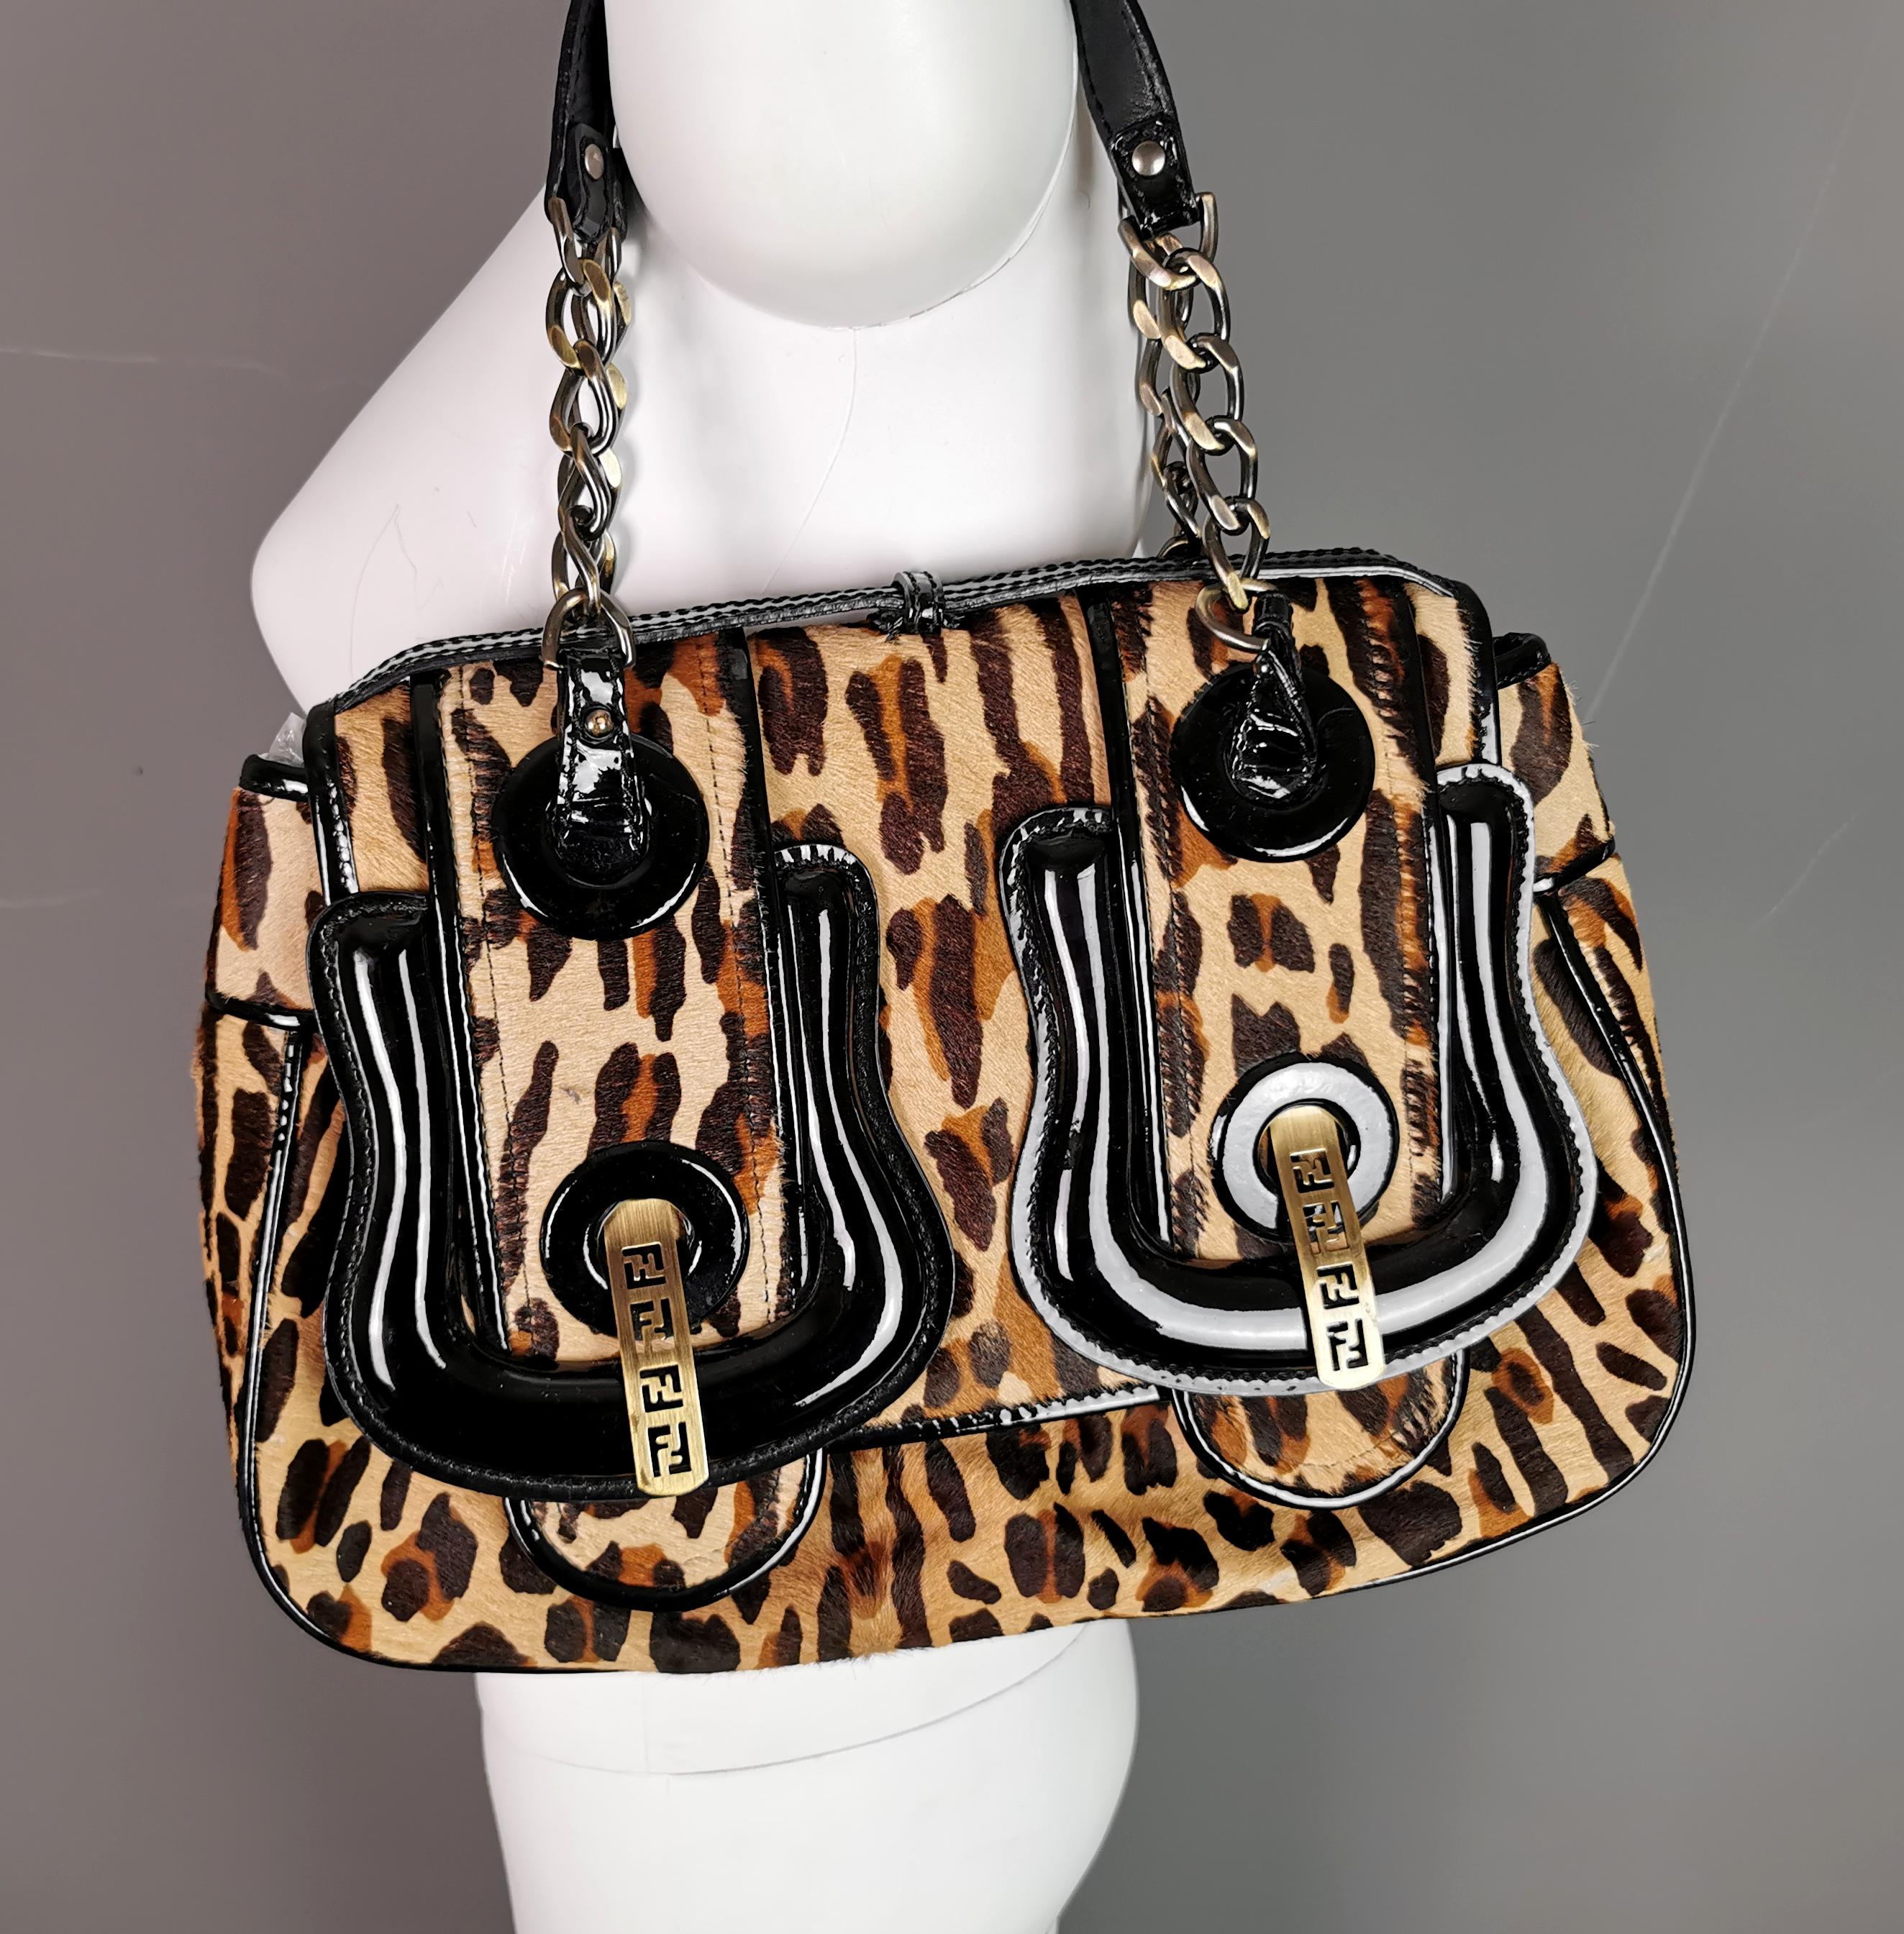 A truly stunning vintage Fendi leopard print, pony style calf skin B bag.

It has a lovely leopard print design with chunky black patent leather faux buckles to the front, the shiny black leather contrasting really well with the iconic leopard